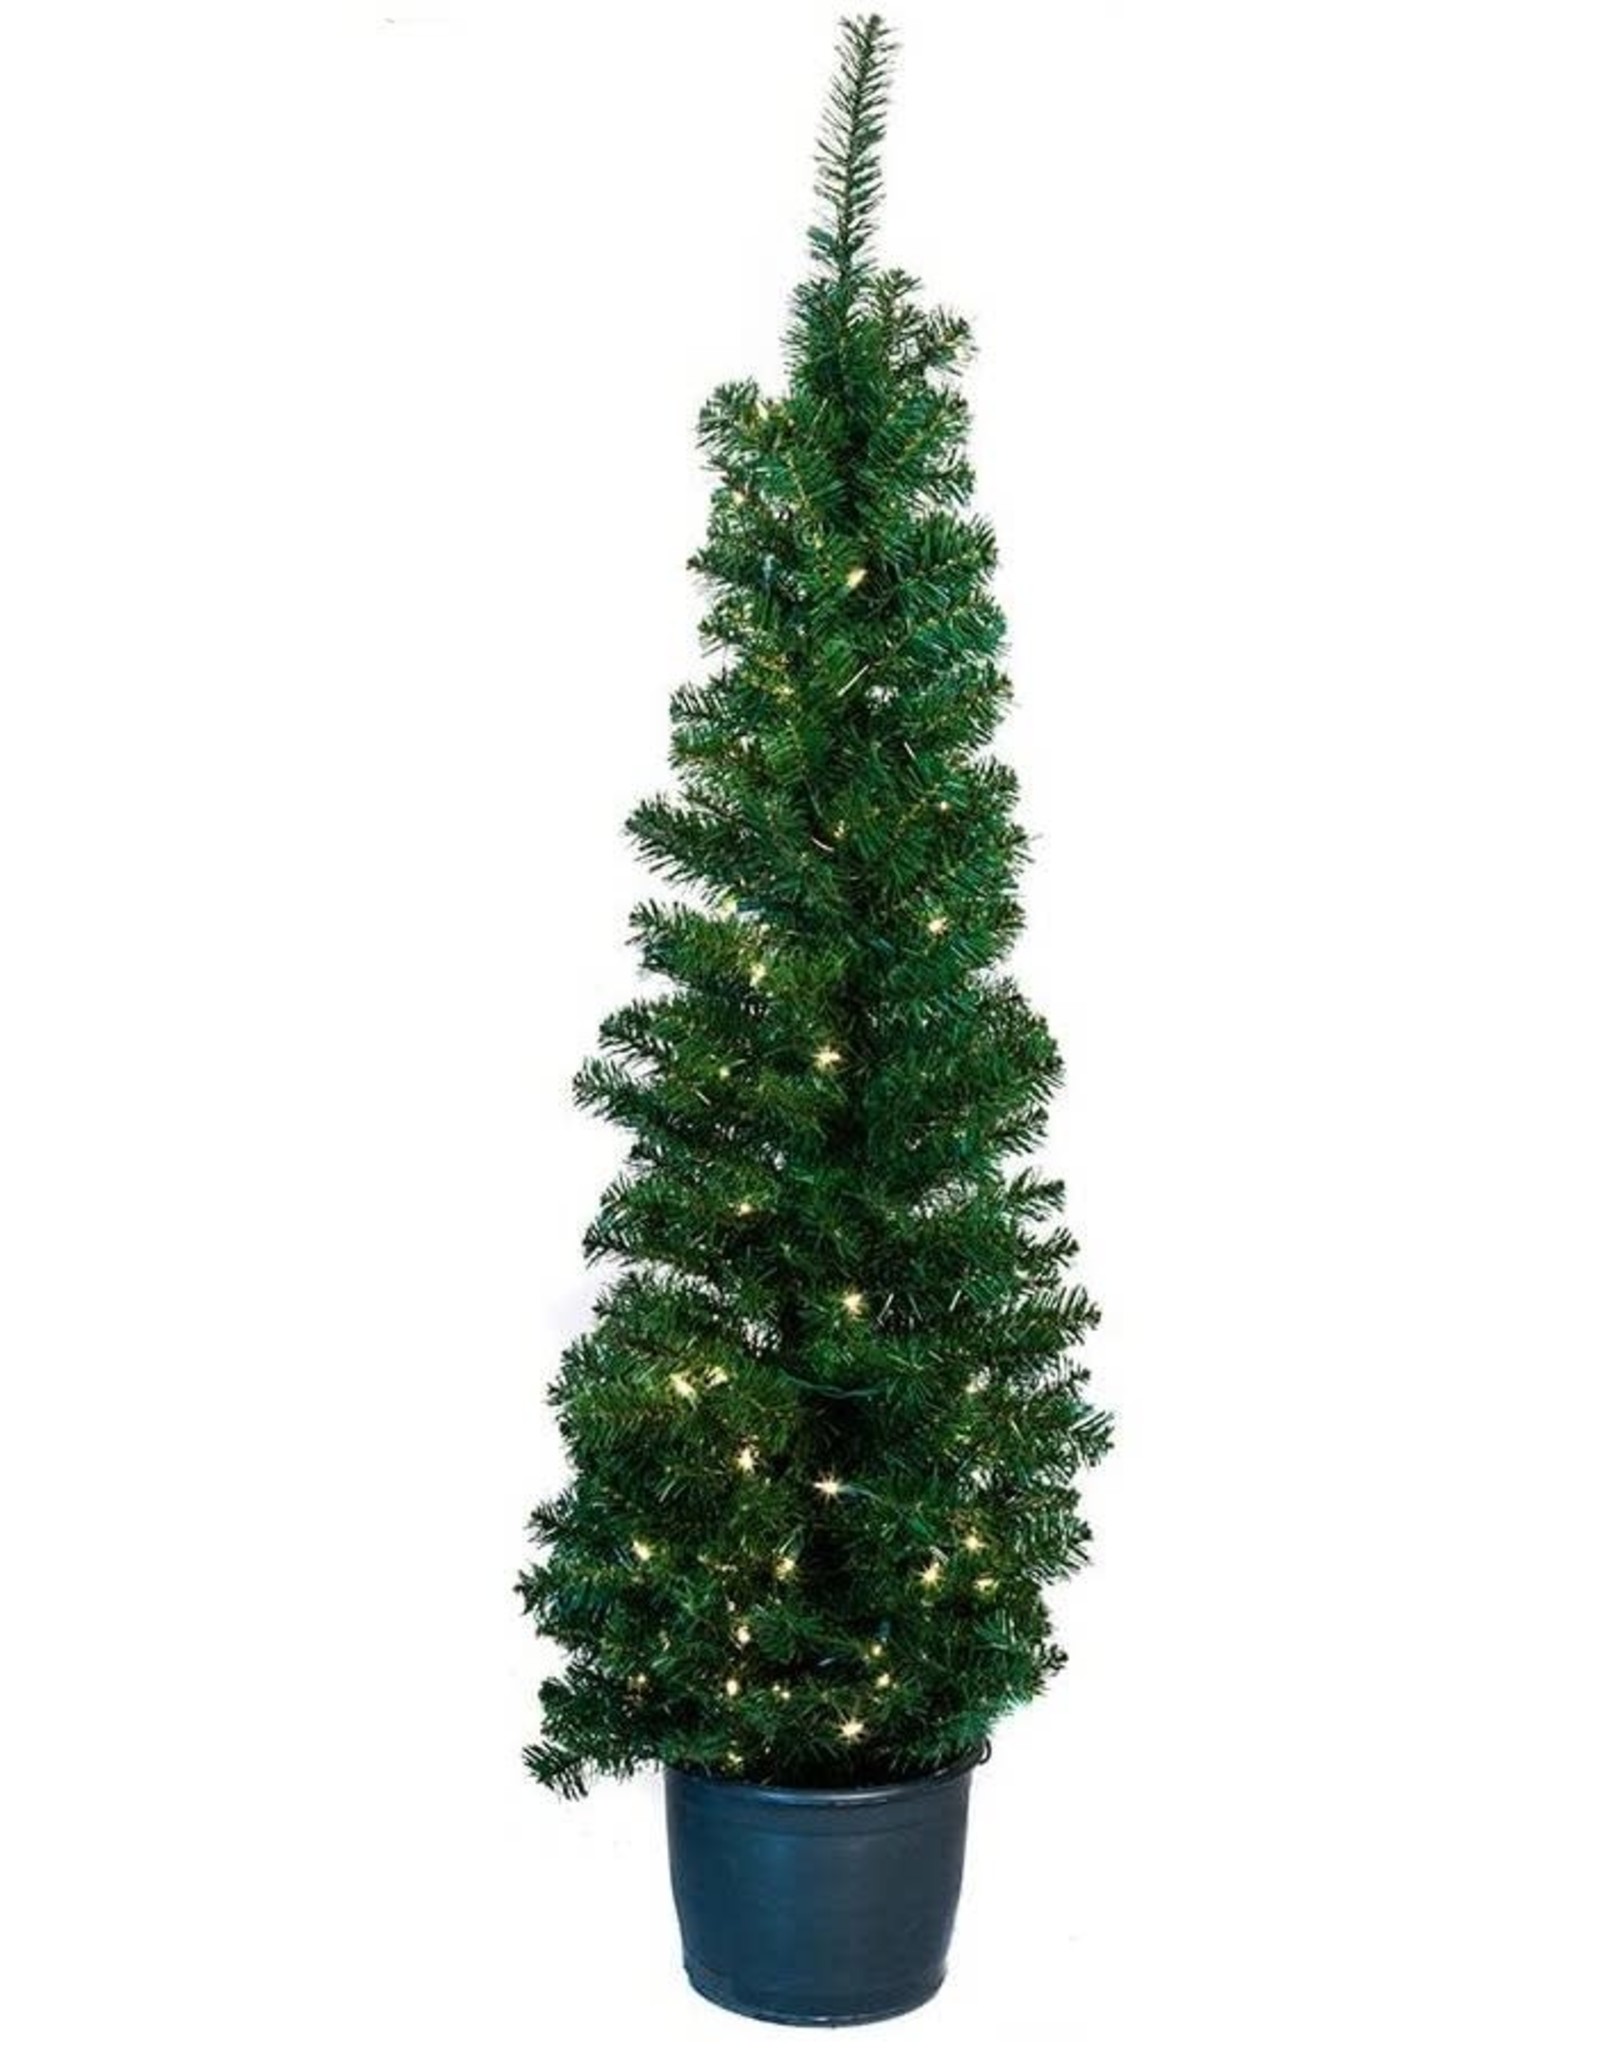 Kurt Adler Christmas Tree Pre-Lit 5 FT Potted Tree with Clear lights